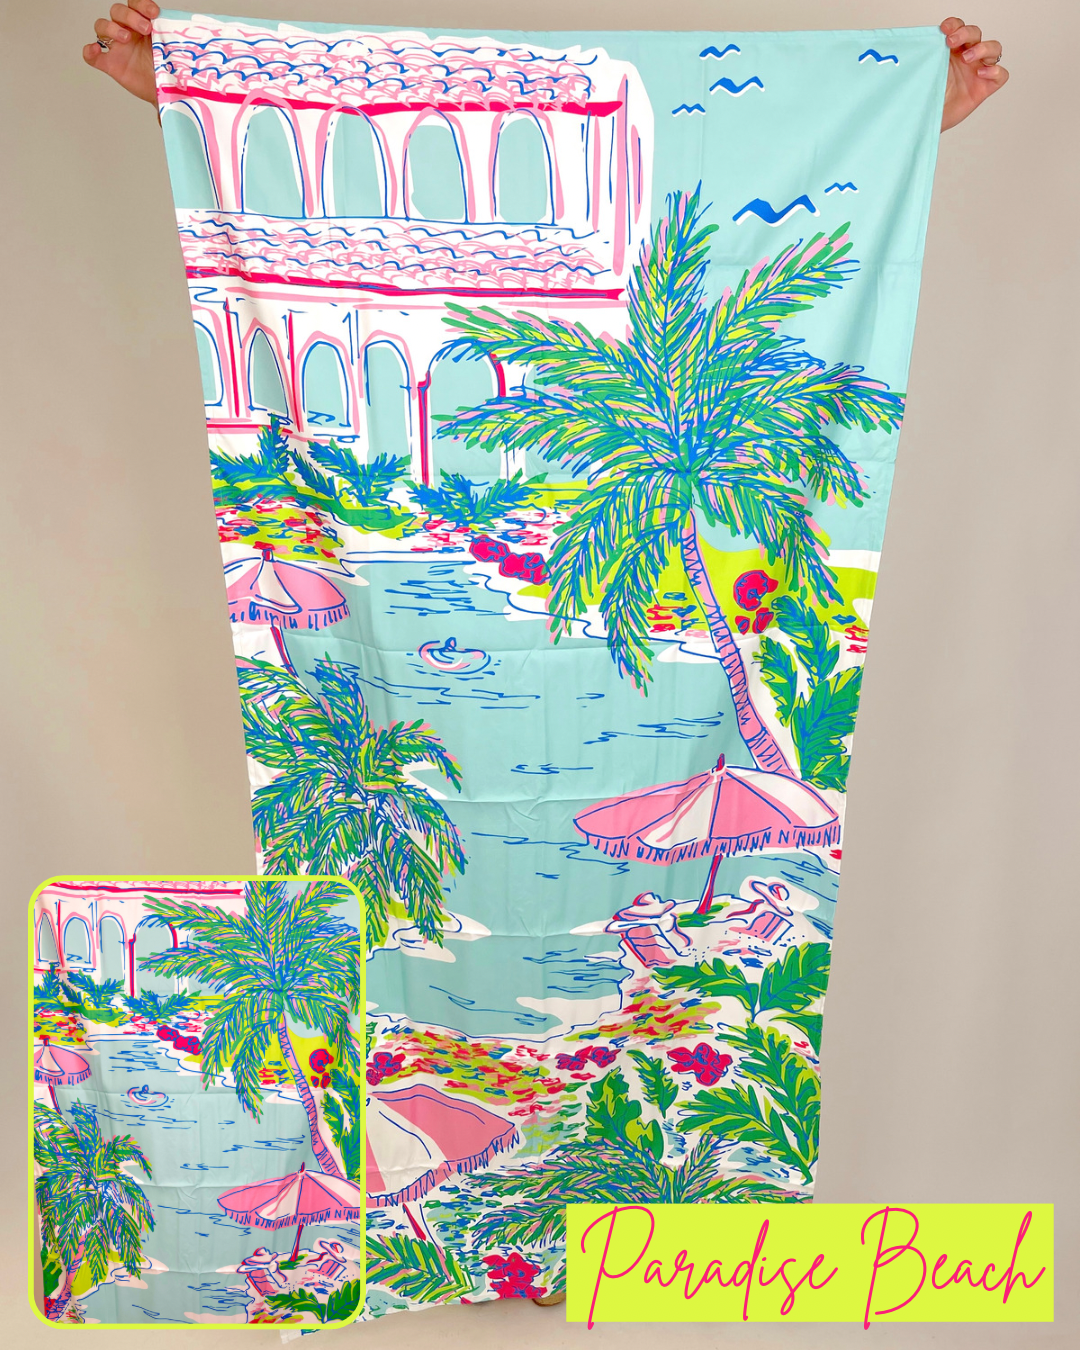 By The Shore Beach Towel-Beach Towels-Royal Standard-The Village Shoppe, Women’s Fashion Boutique, Shop Online and In Store - Located in Muscle Shoals, AL.